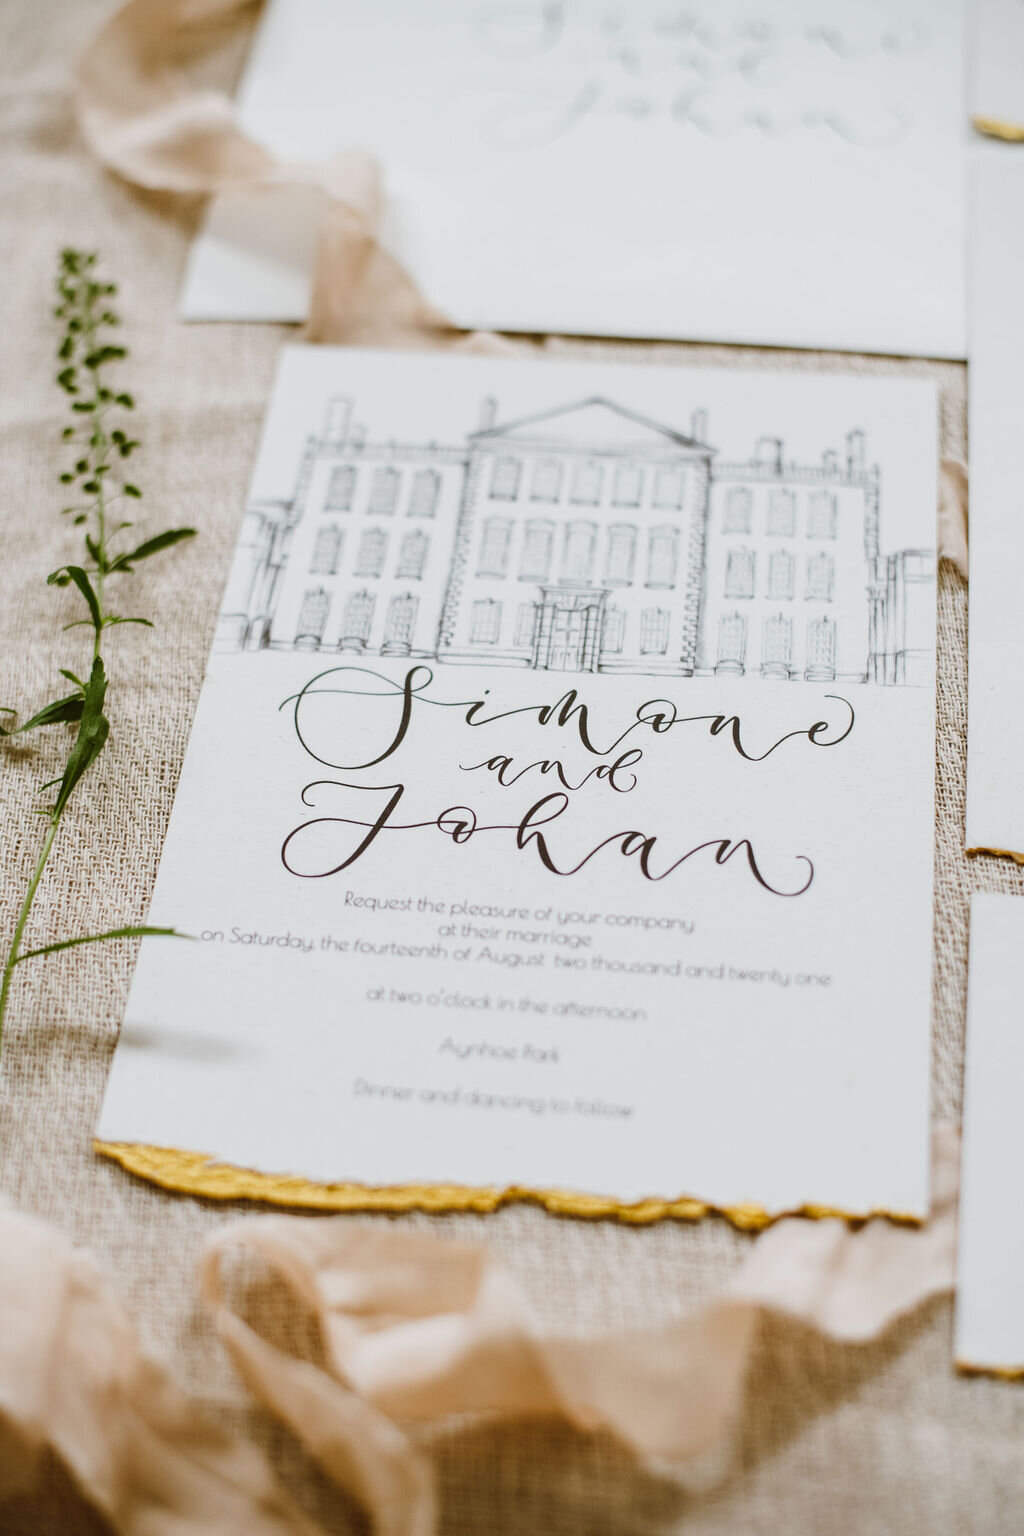 Monochrome Aynhoe Park invitation with venue illustration printed on recycled paper with gold details by The Amyverse.jpg